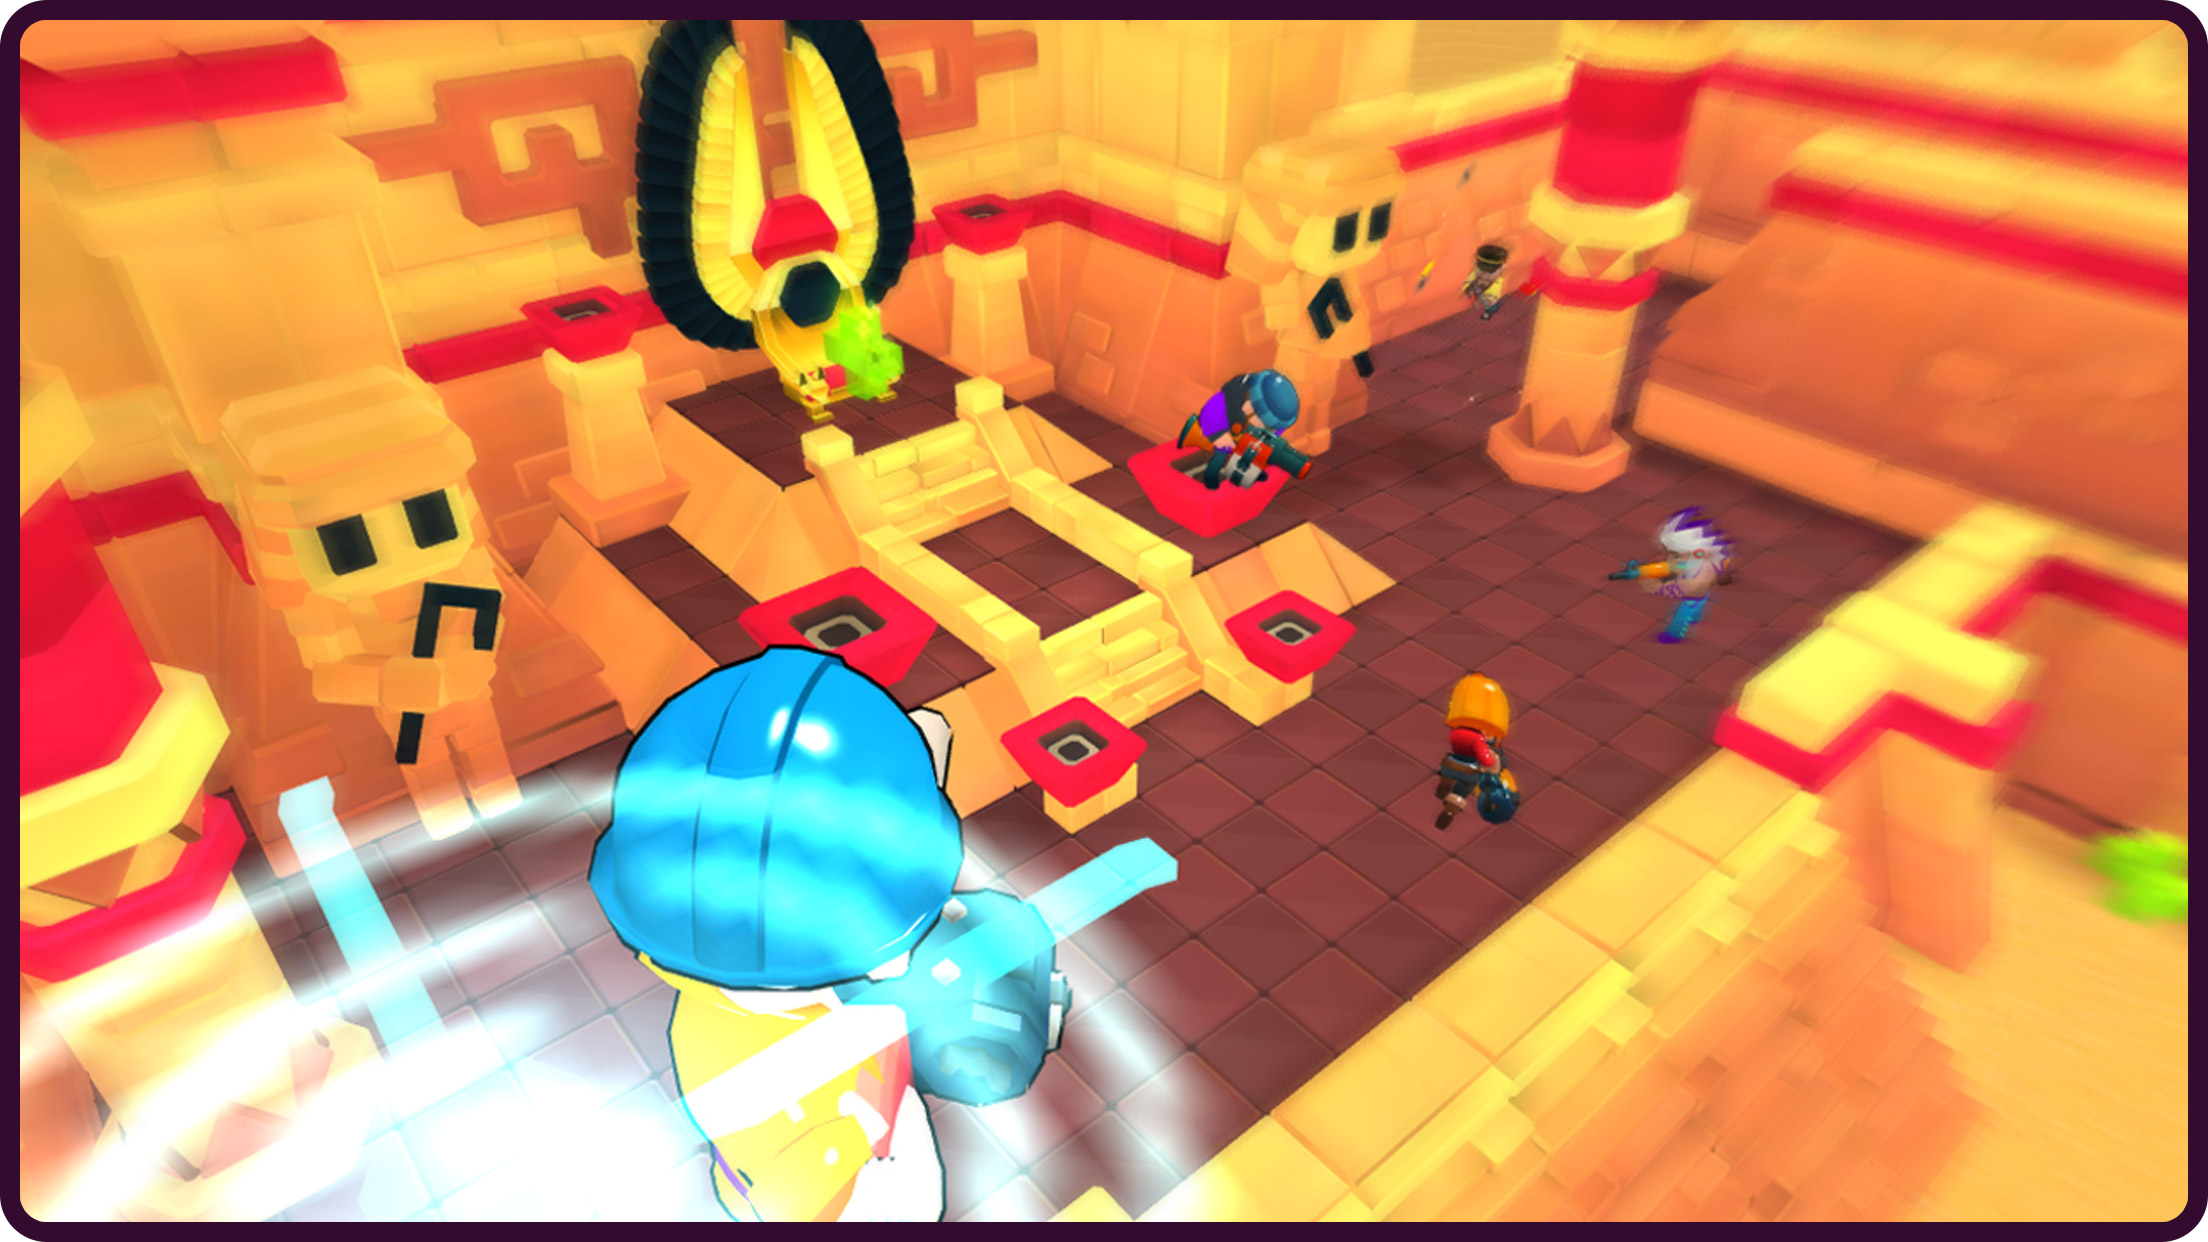 game image from Pandonia Arena